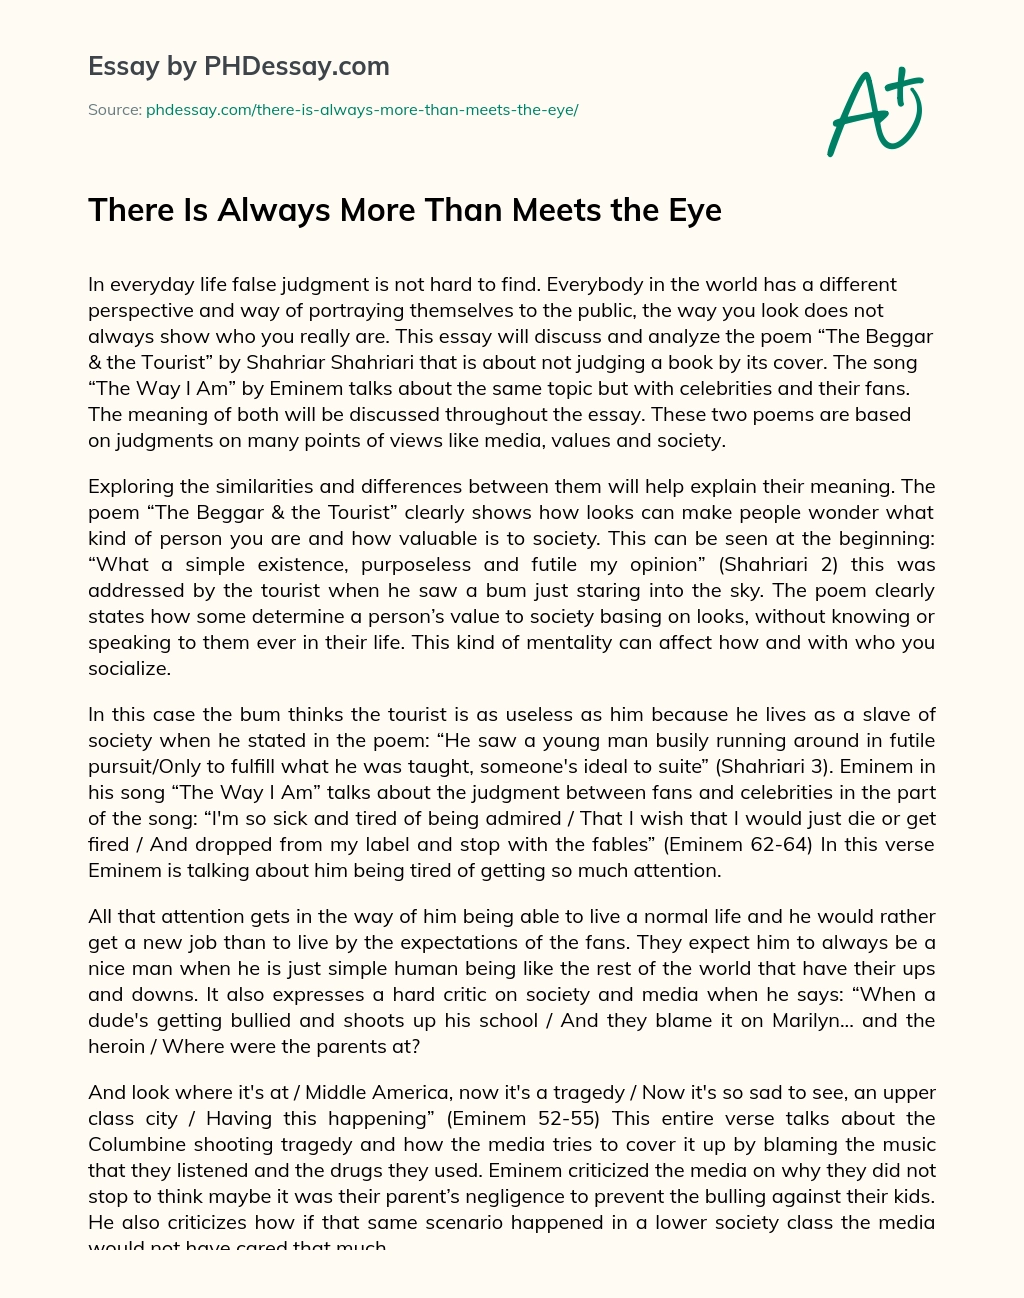 There Is Always More Than Meets the Eye essay